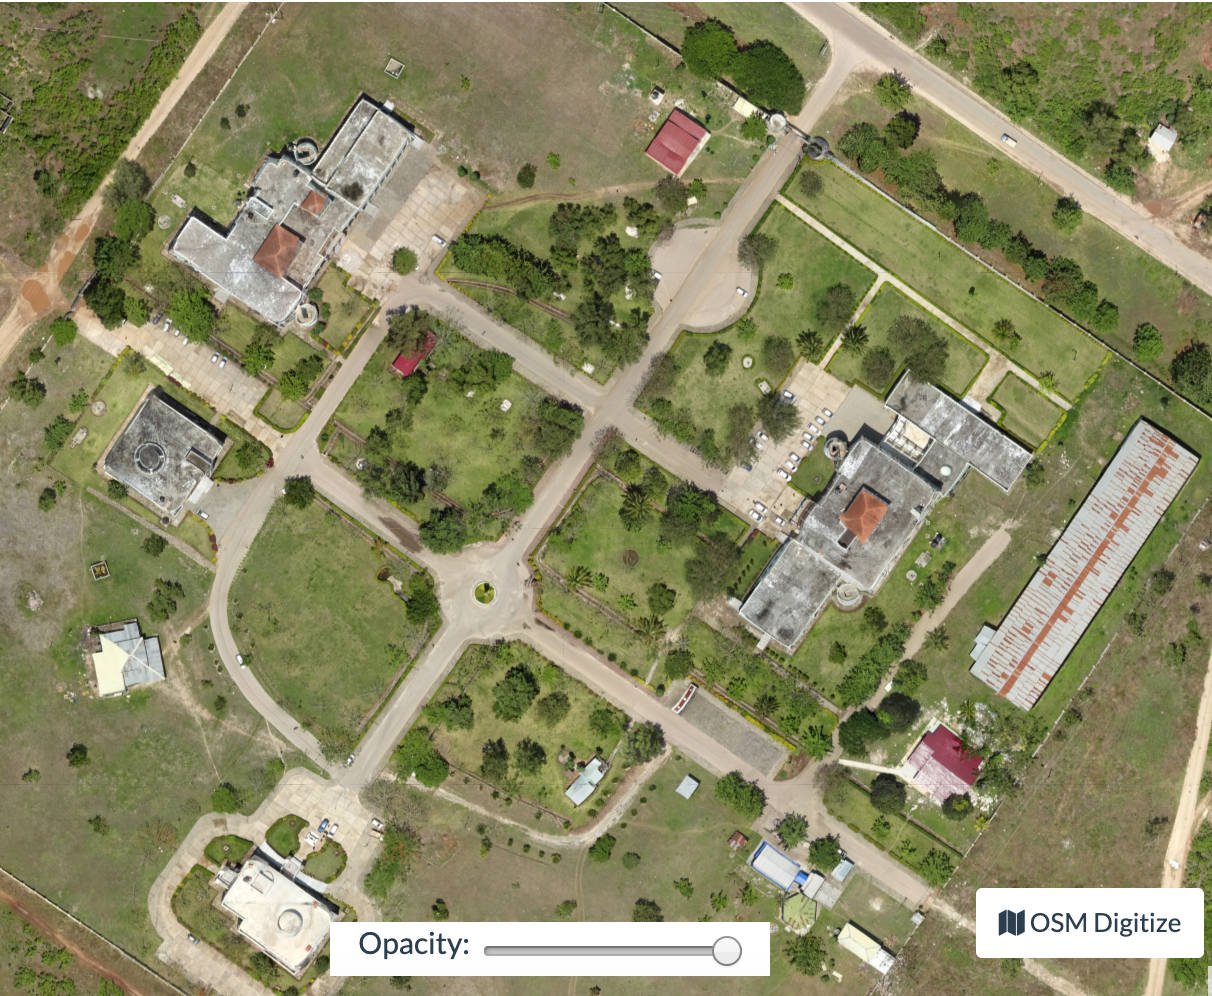 image of OpenDroneMap orthophoto